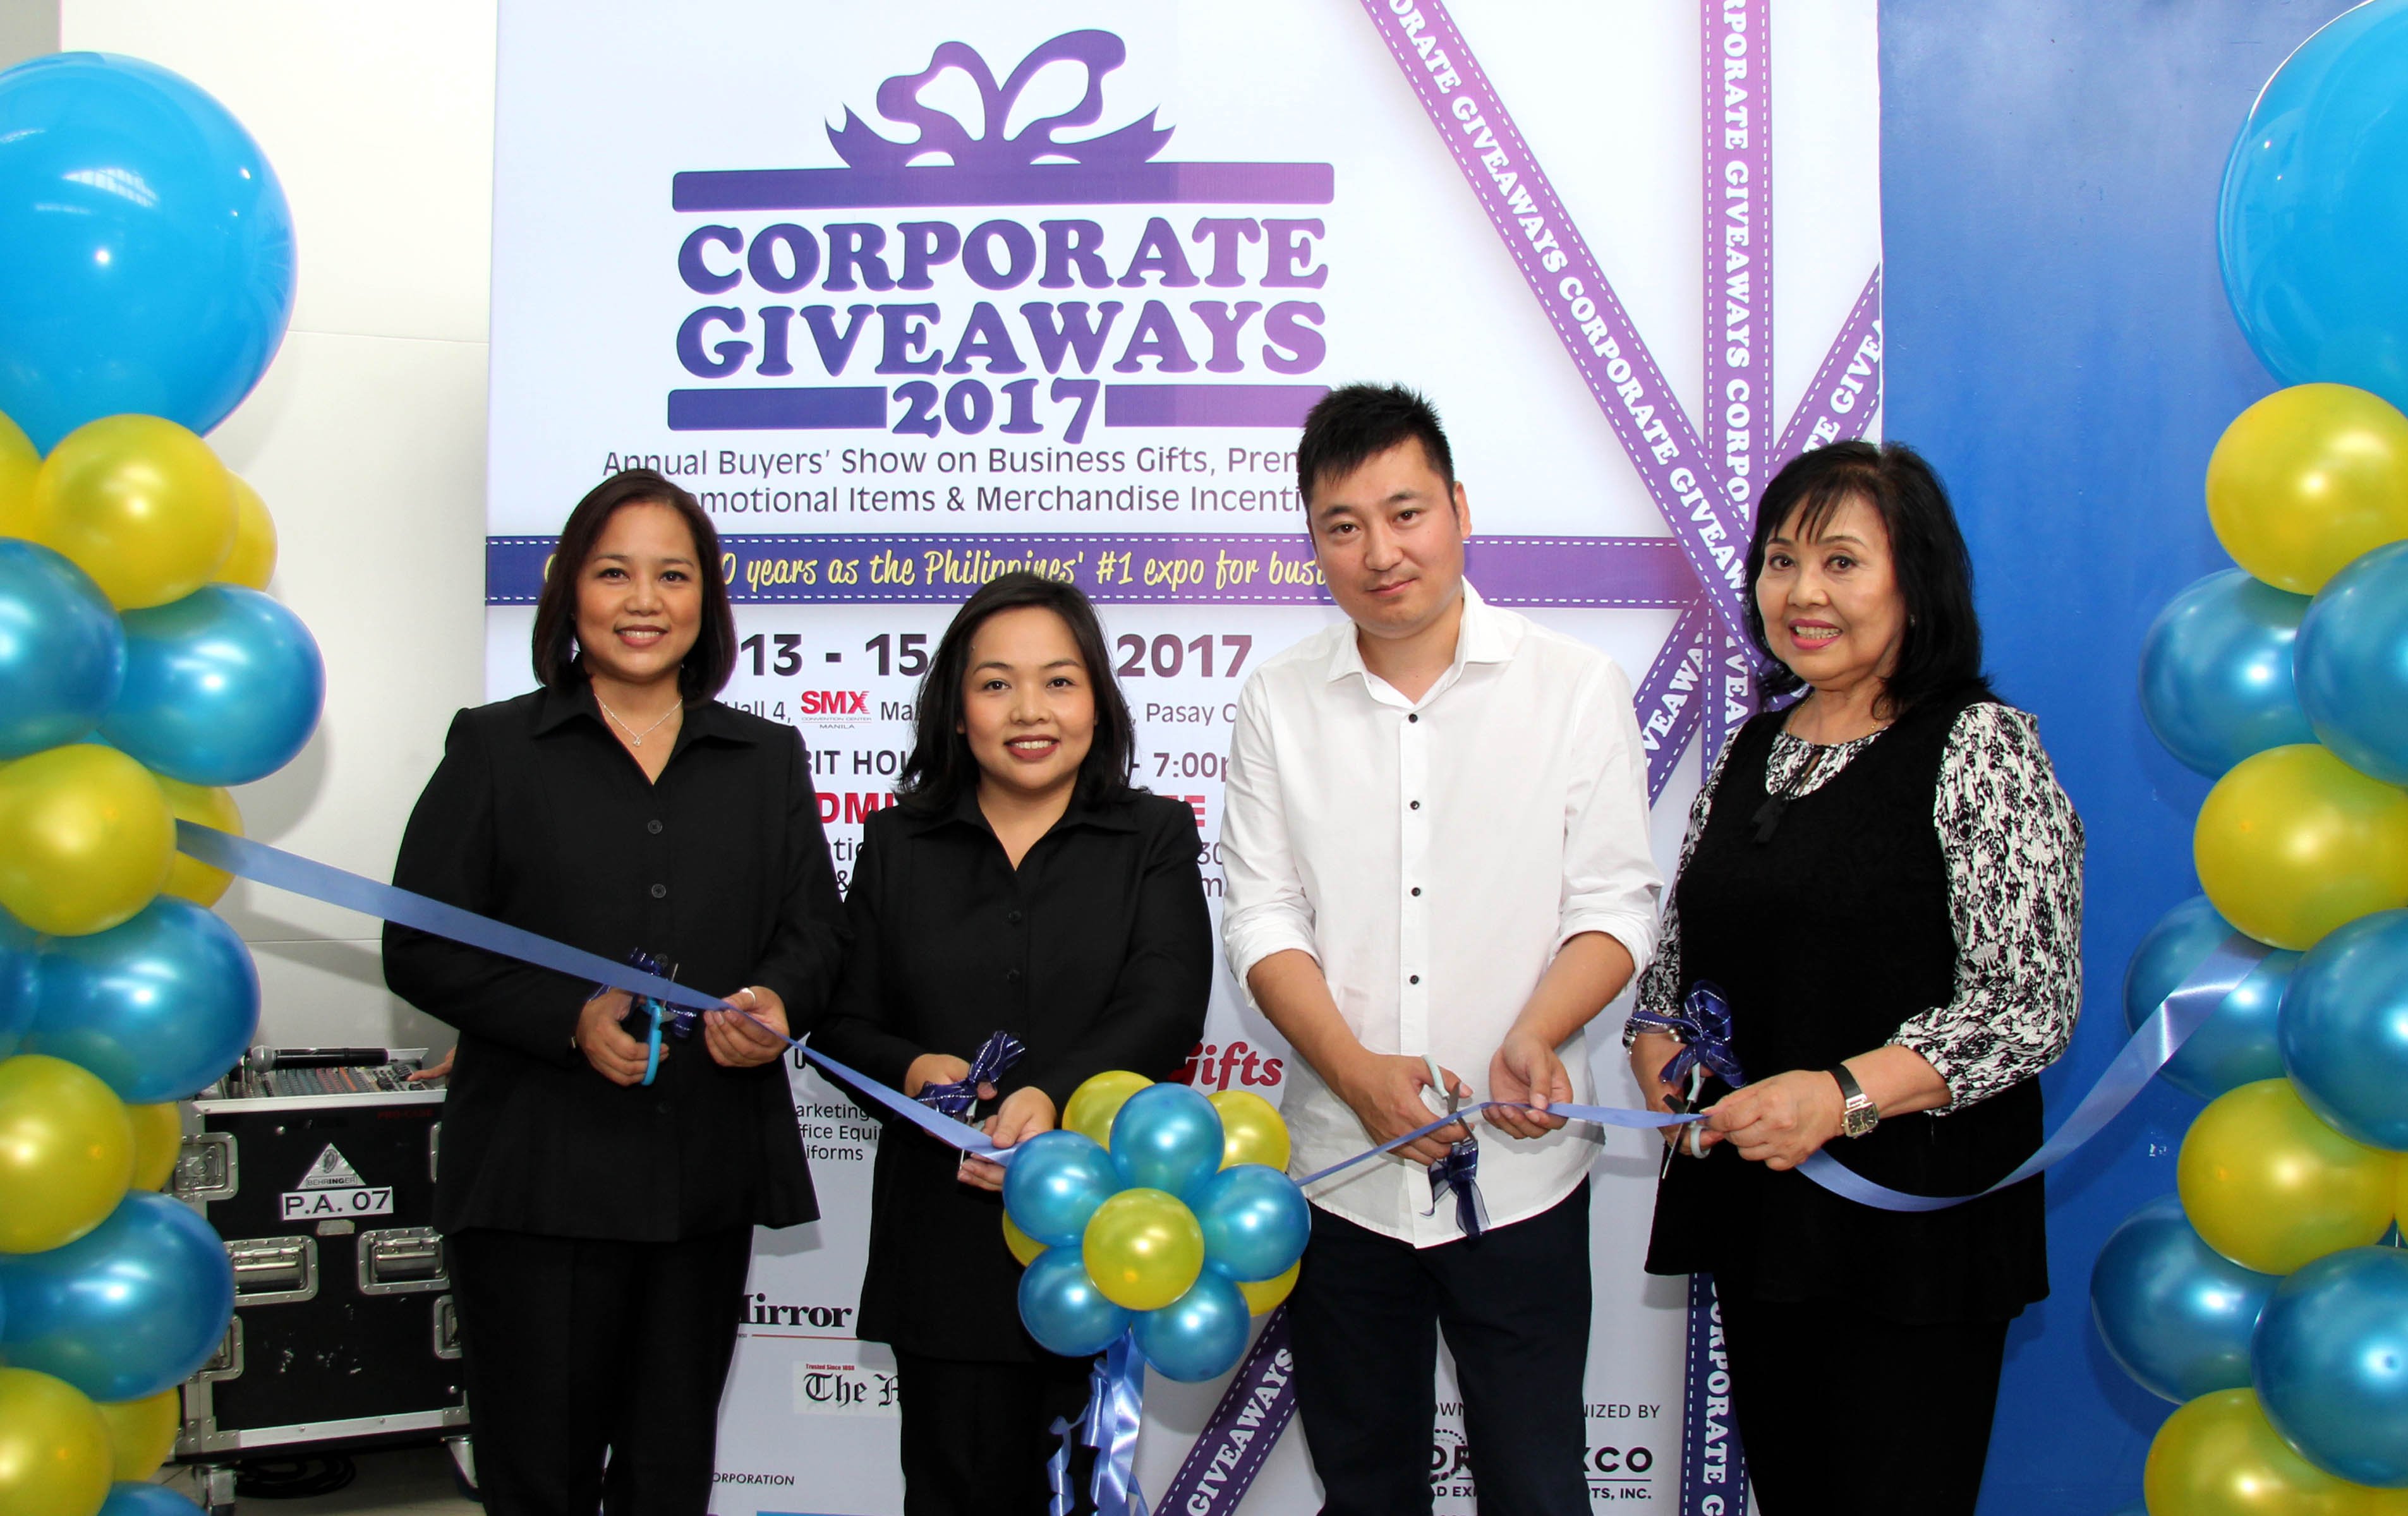 Opening of World Expos and Concepts Inc. (Worldexco)at SMX Mall of Asia Complex, Pasay City